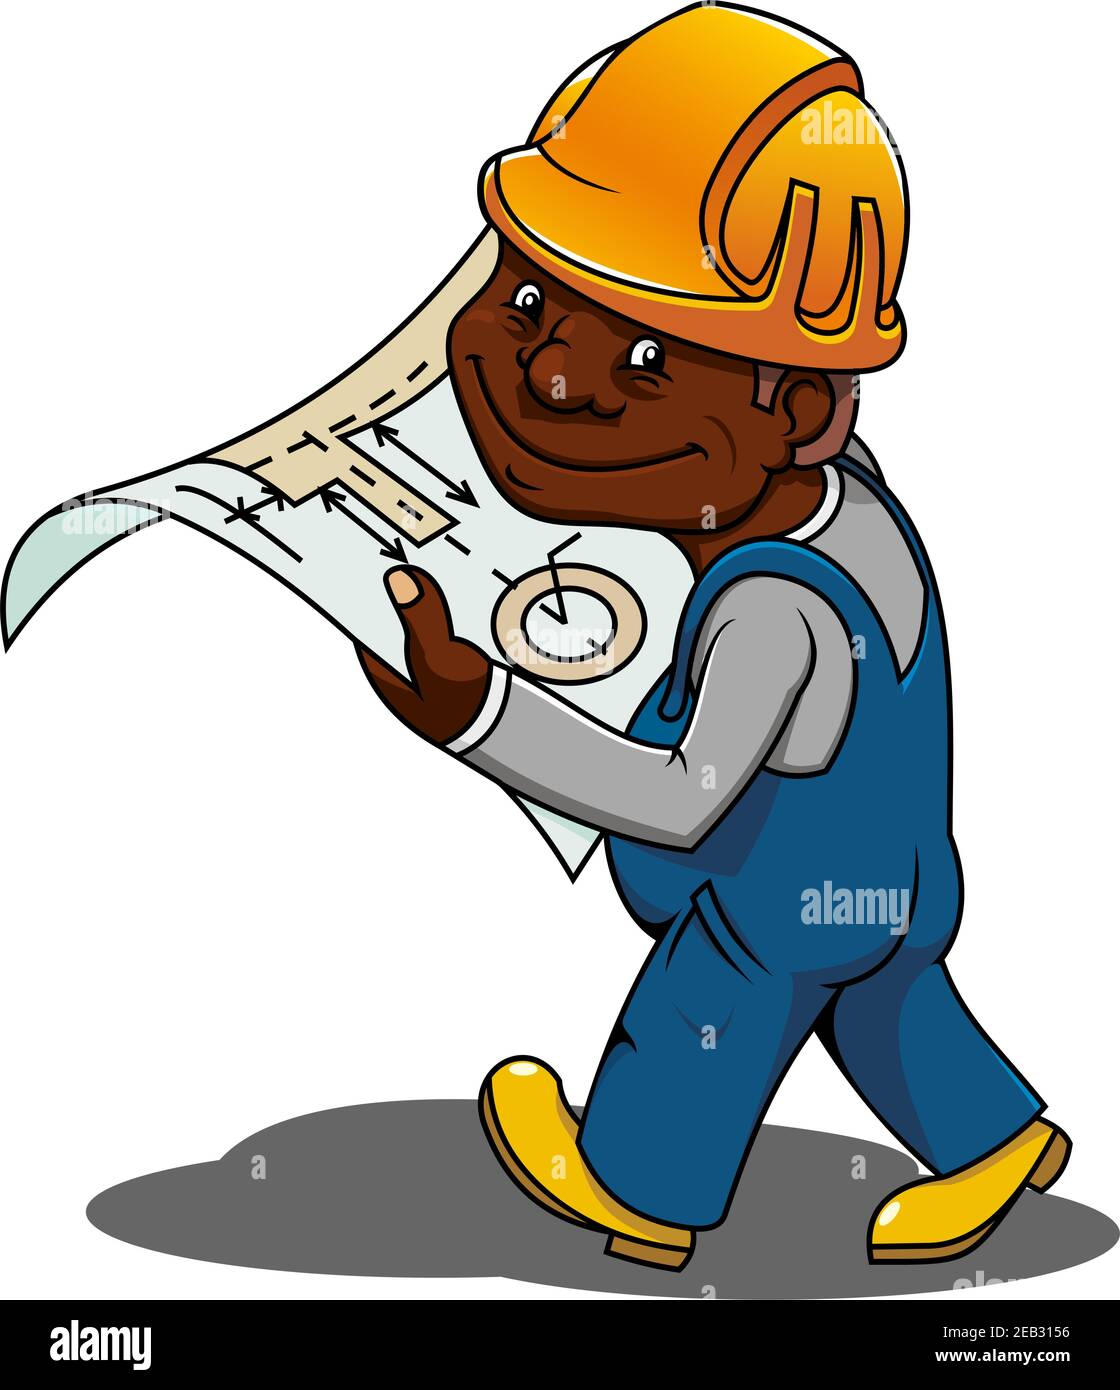 African american construction engineer or builder cartoon character in yellow hard hat and blue overalls holding blueprint of building project Stock Vector